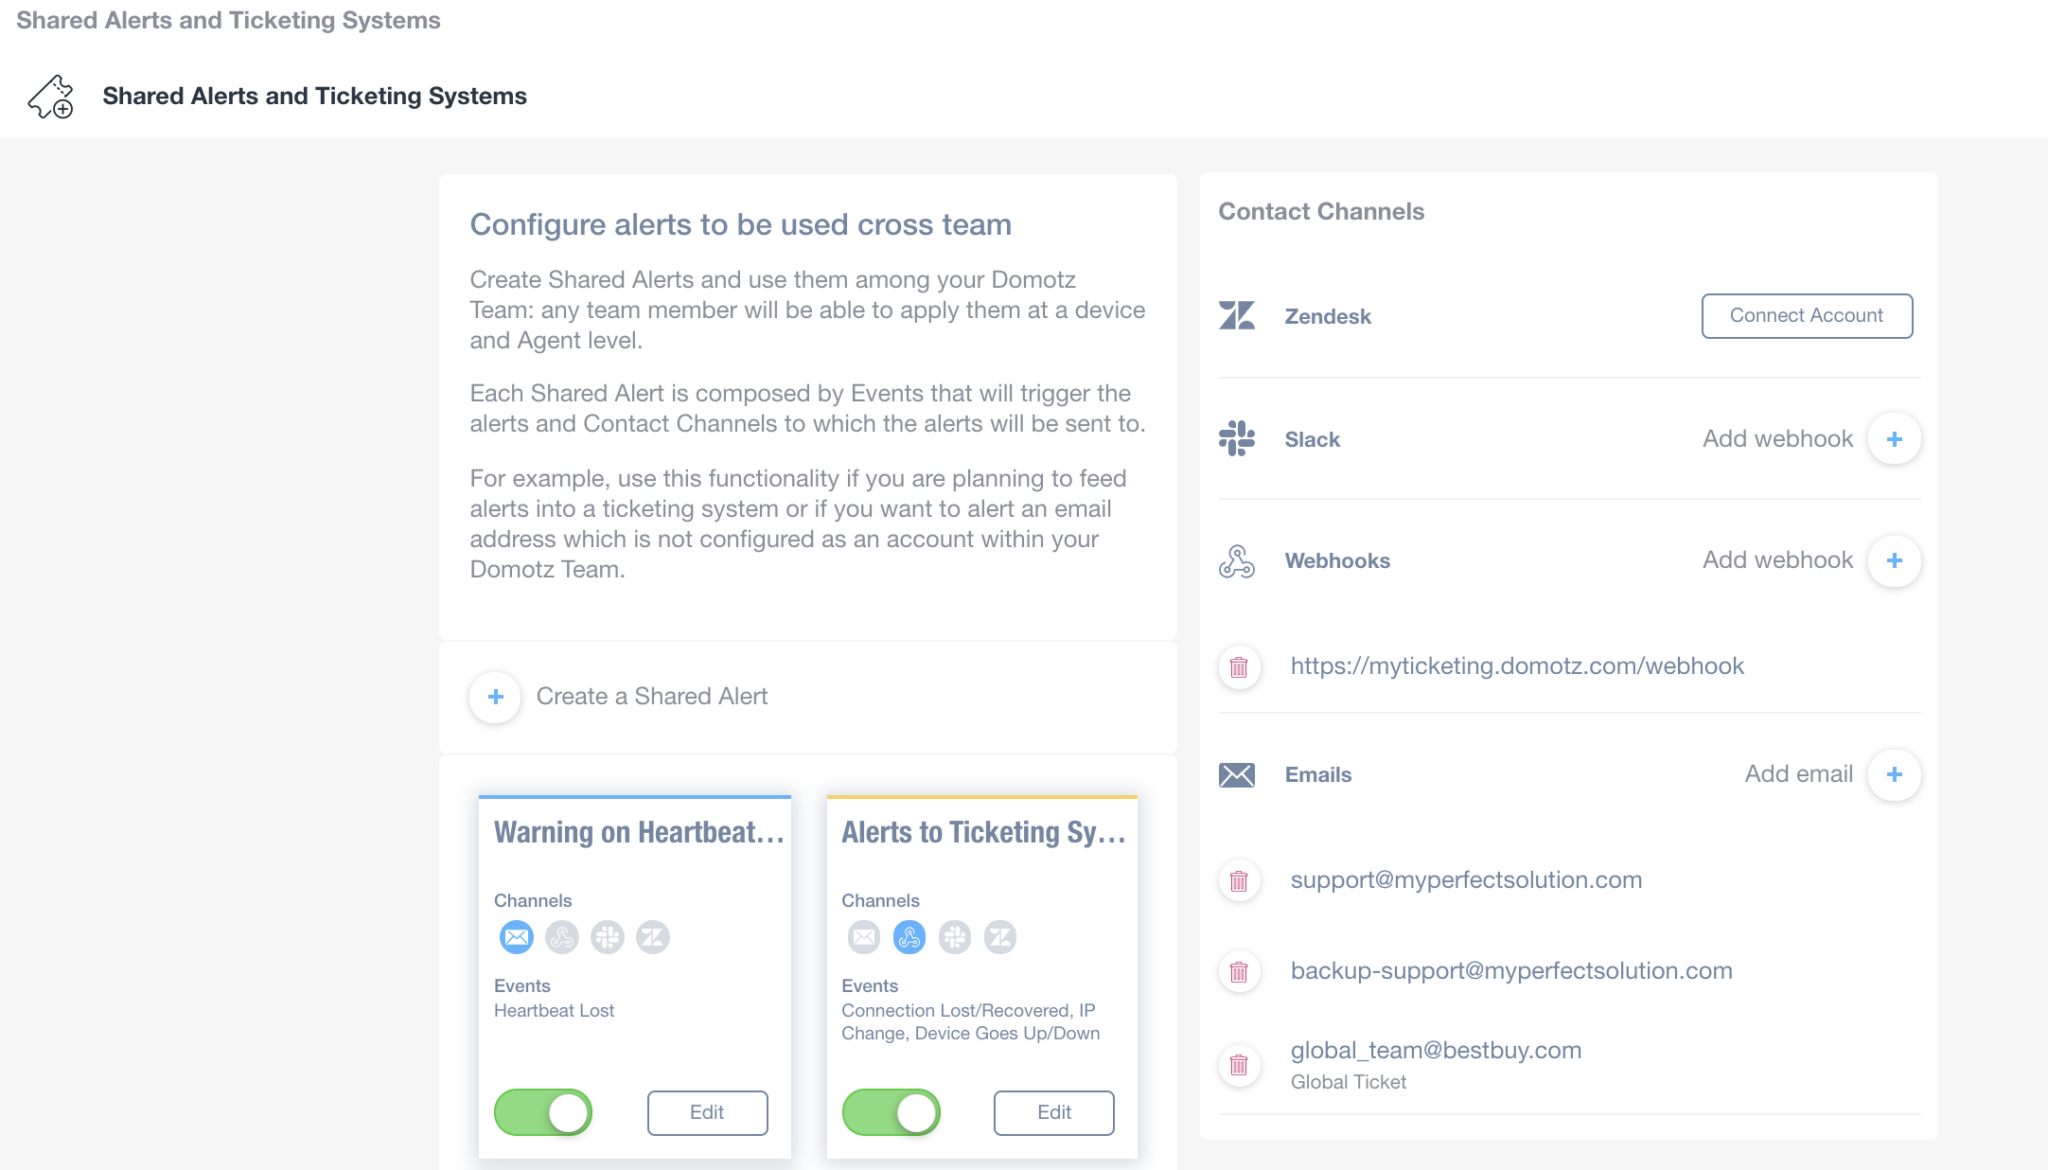 Zendesk becomes a Contact Channel for Shared Alerts